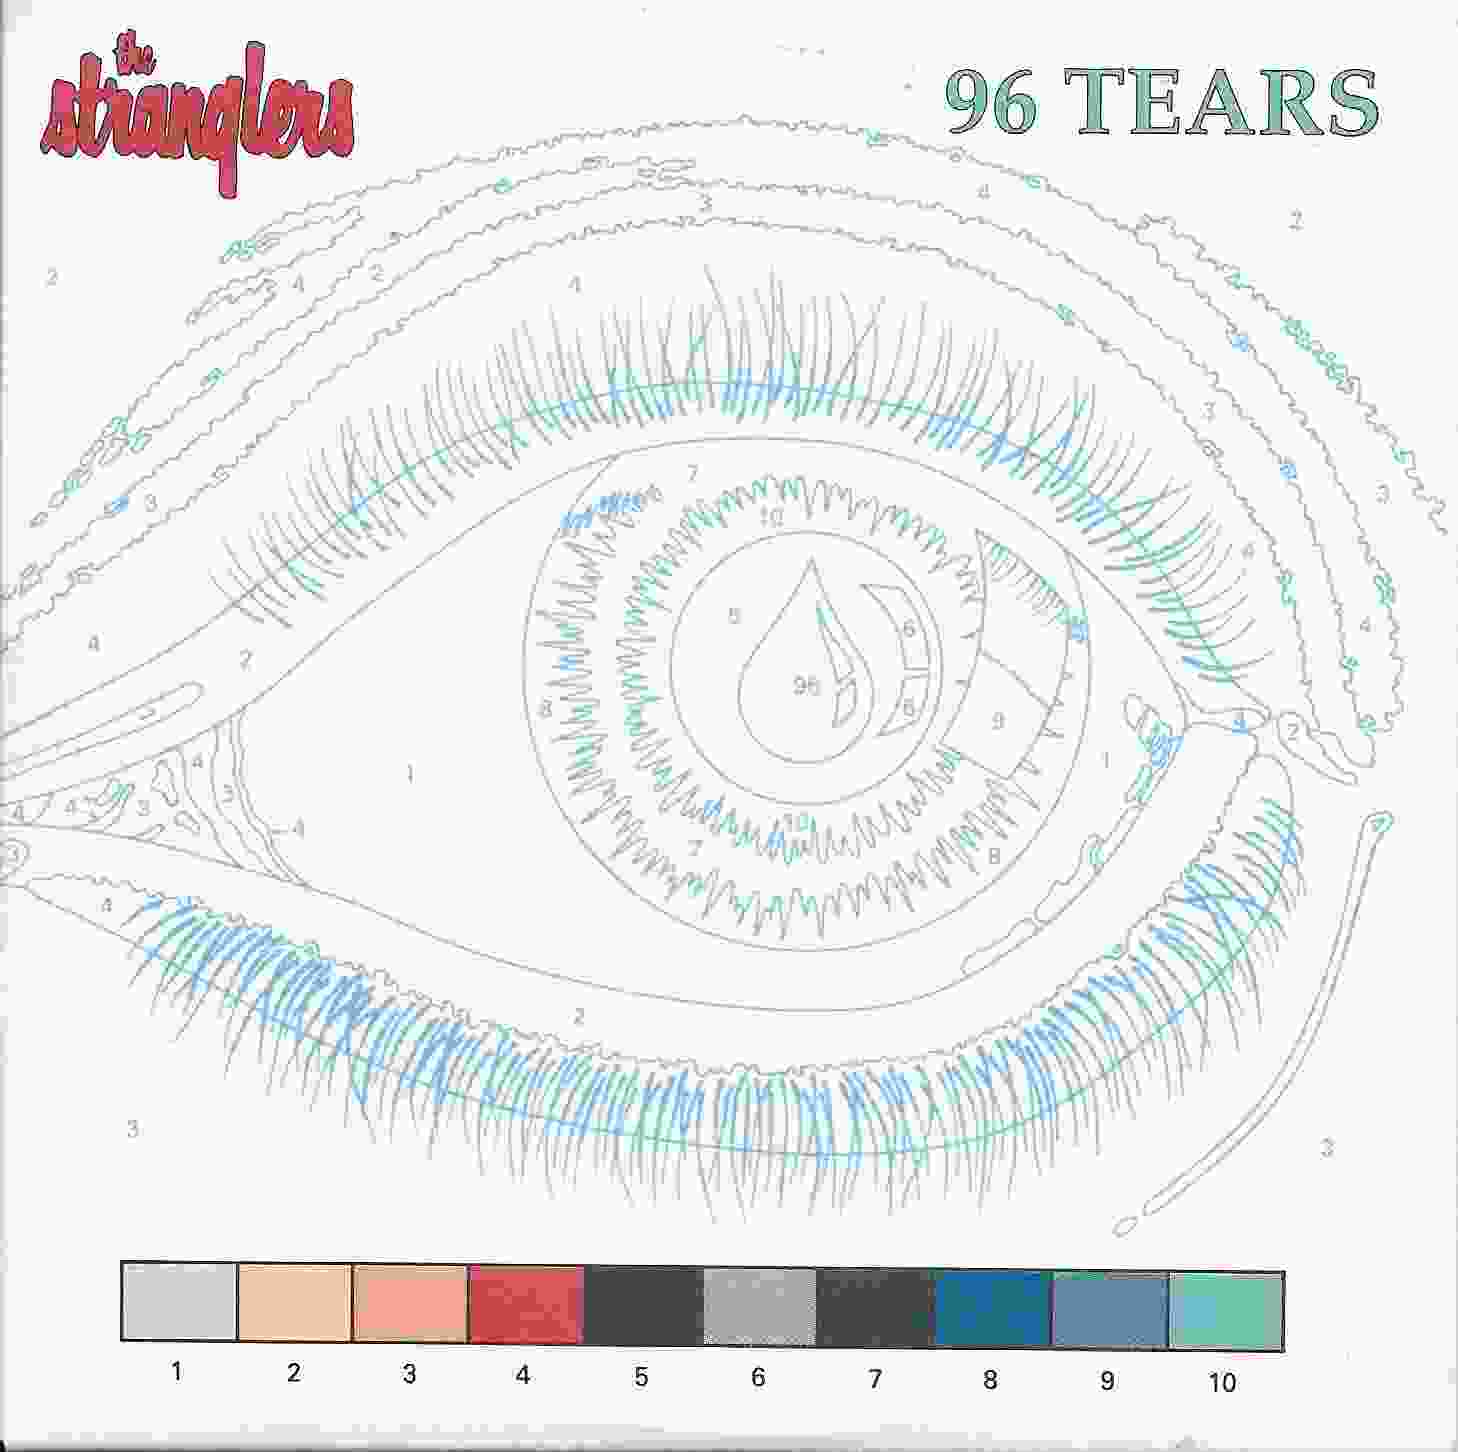 Picture of TEARS C 1 96 tears by artist The Stranglers  from The Stranglers cdsingles